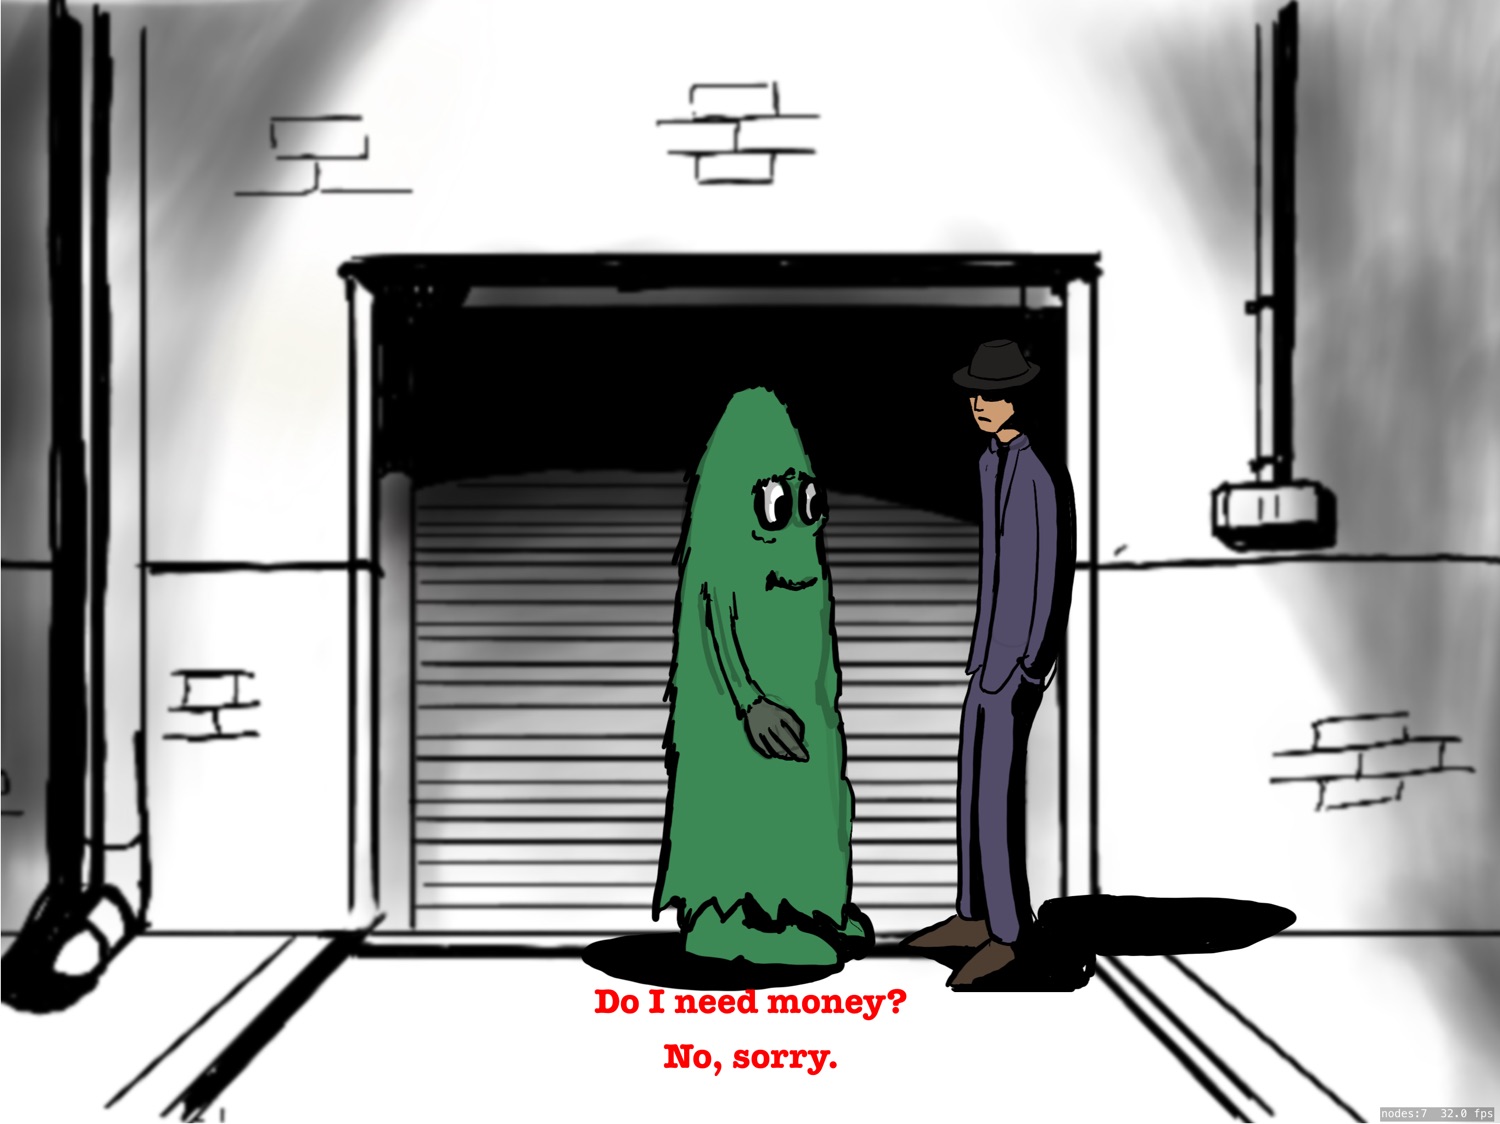 A screenshot of a 2D Adventure game scene, where a green fuzzy monster is meeting a sinister man in a back alley